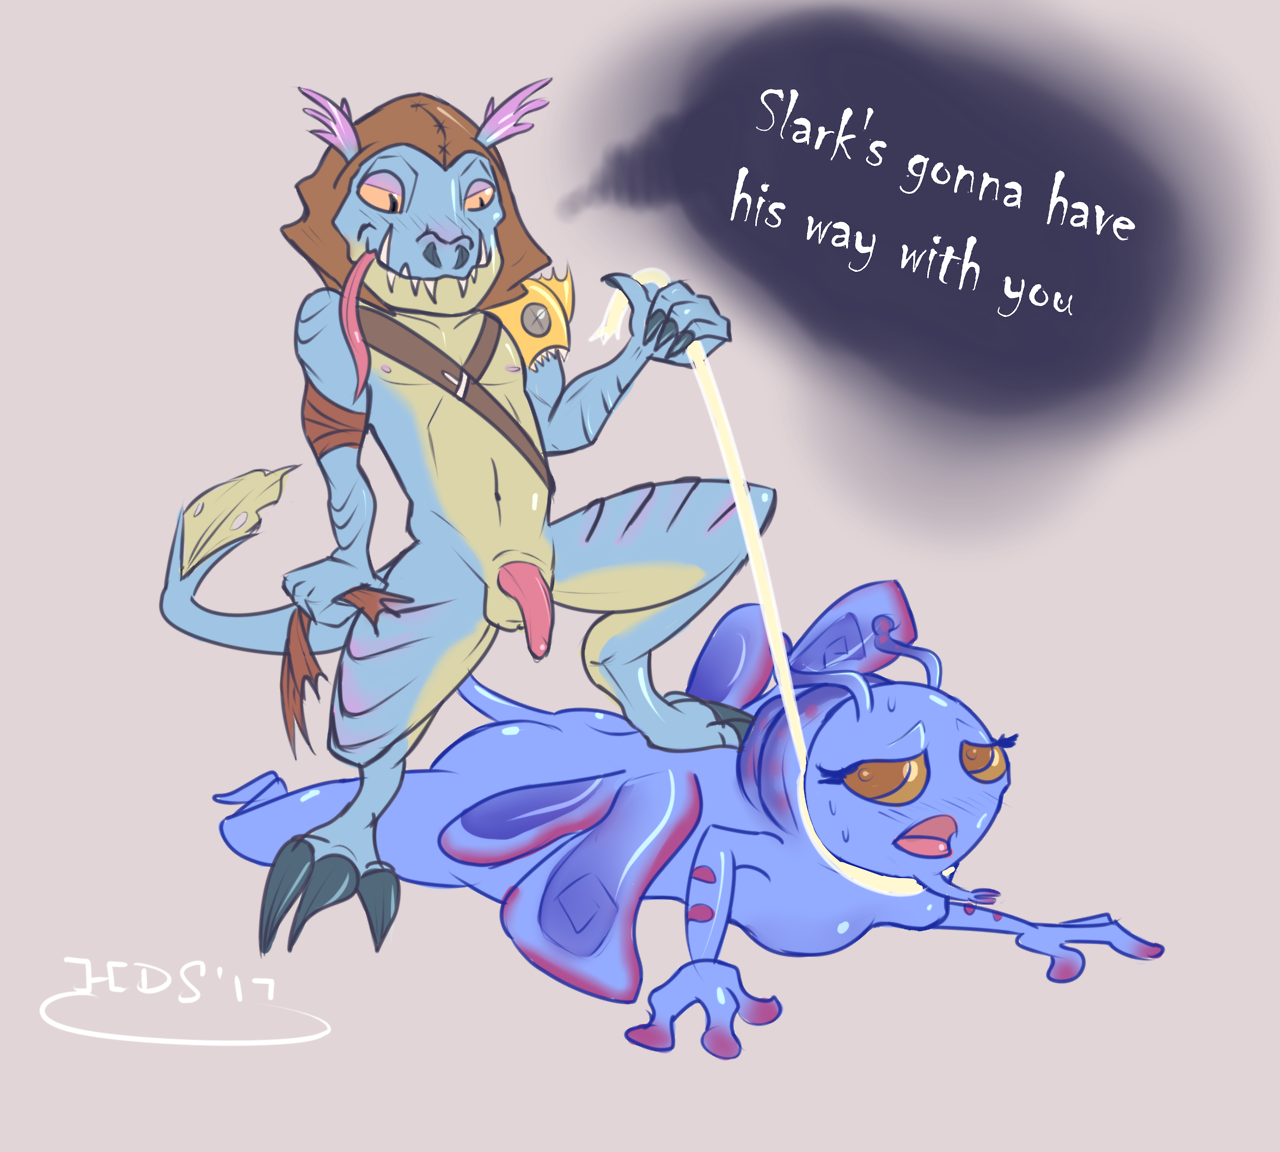 C’mon I haven’t spawned yet!Slark pouncing on fem Puck. Slark and Puck are cuties.